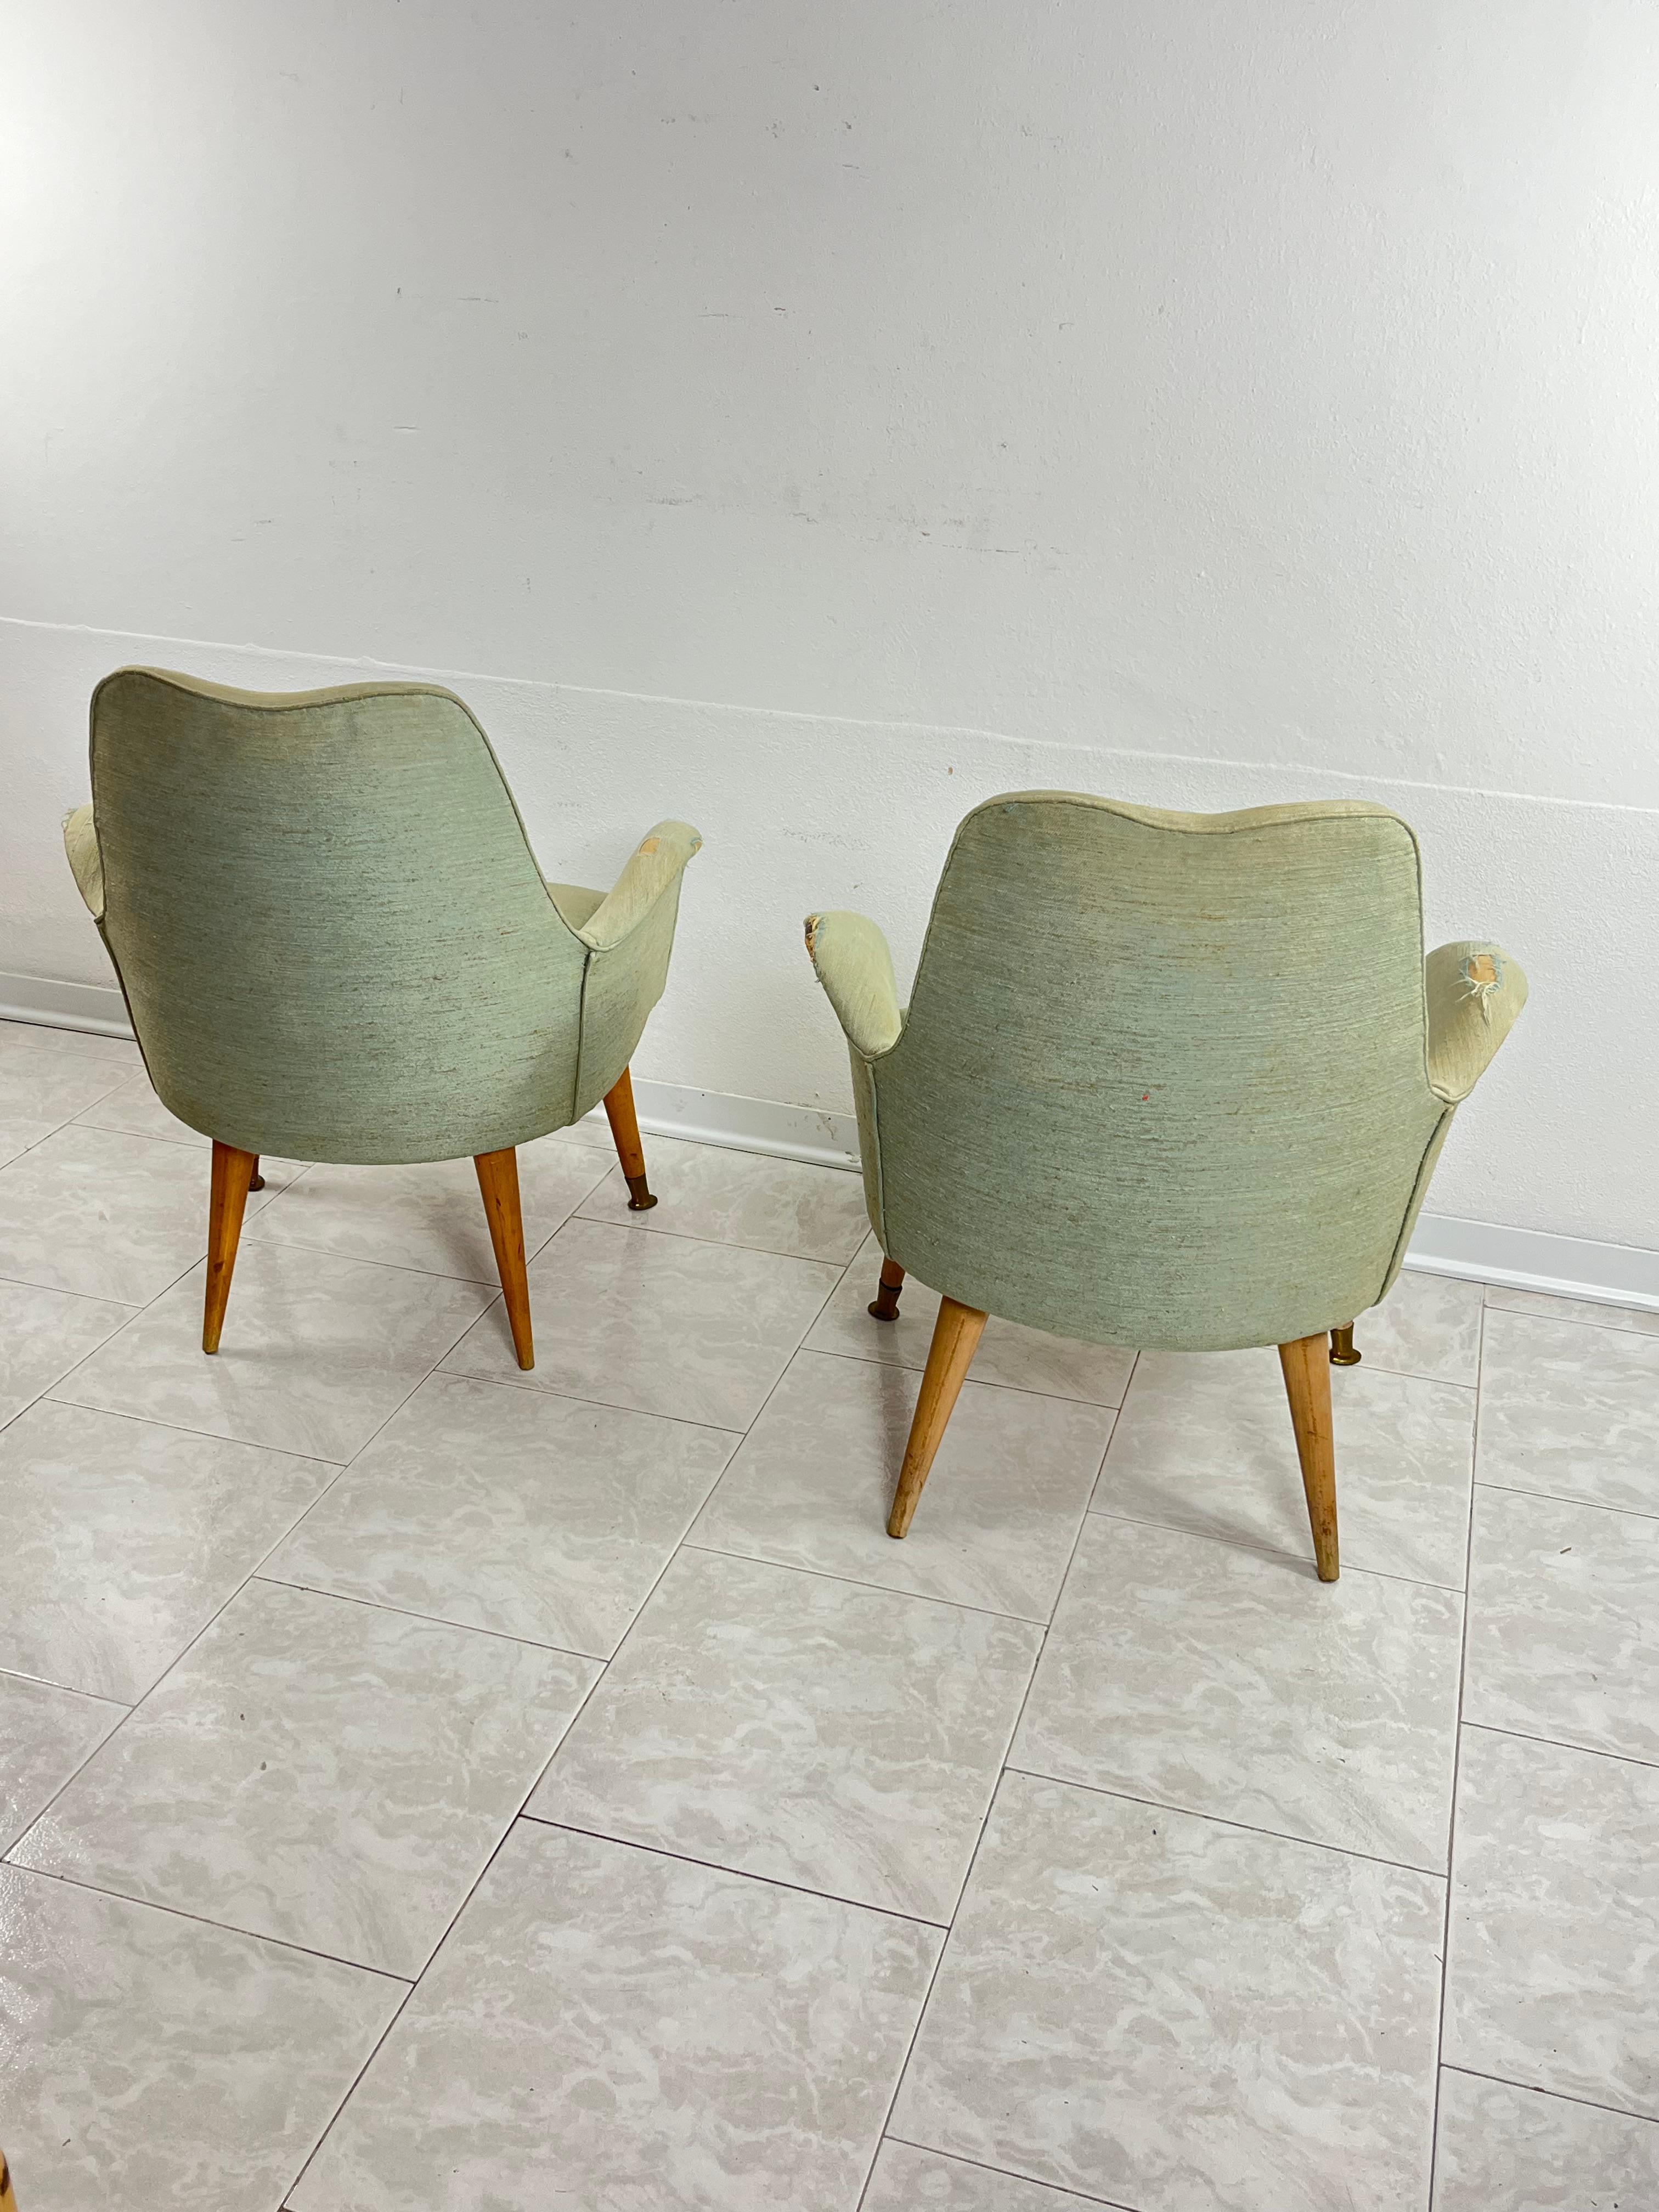 Pair of Mid-Century Armchairs Attributed To Federico Munari 1950s For Sale 1